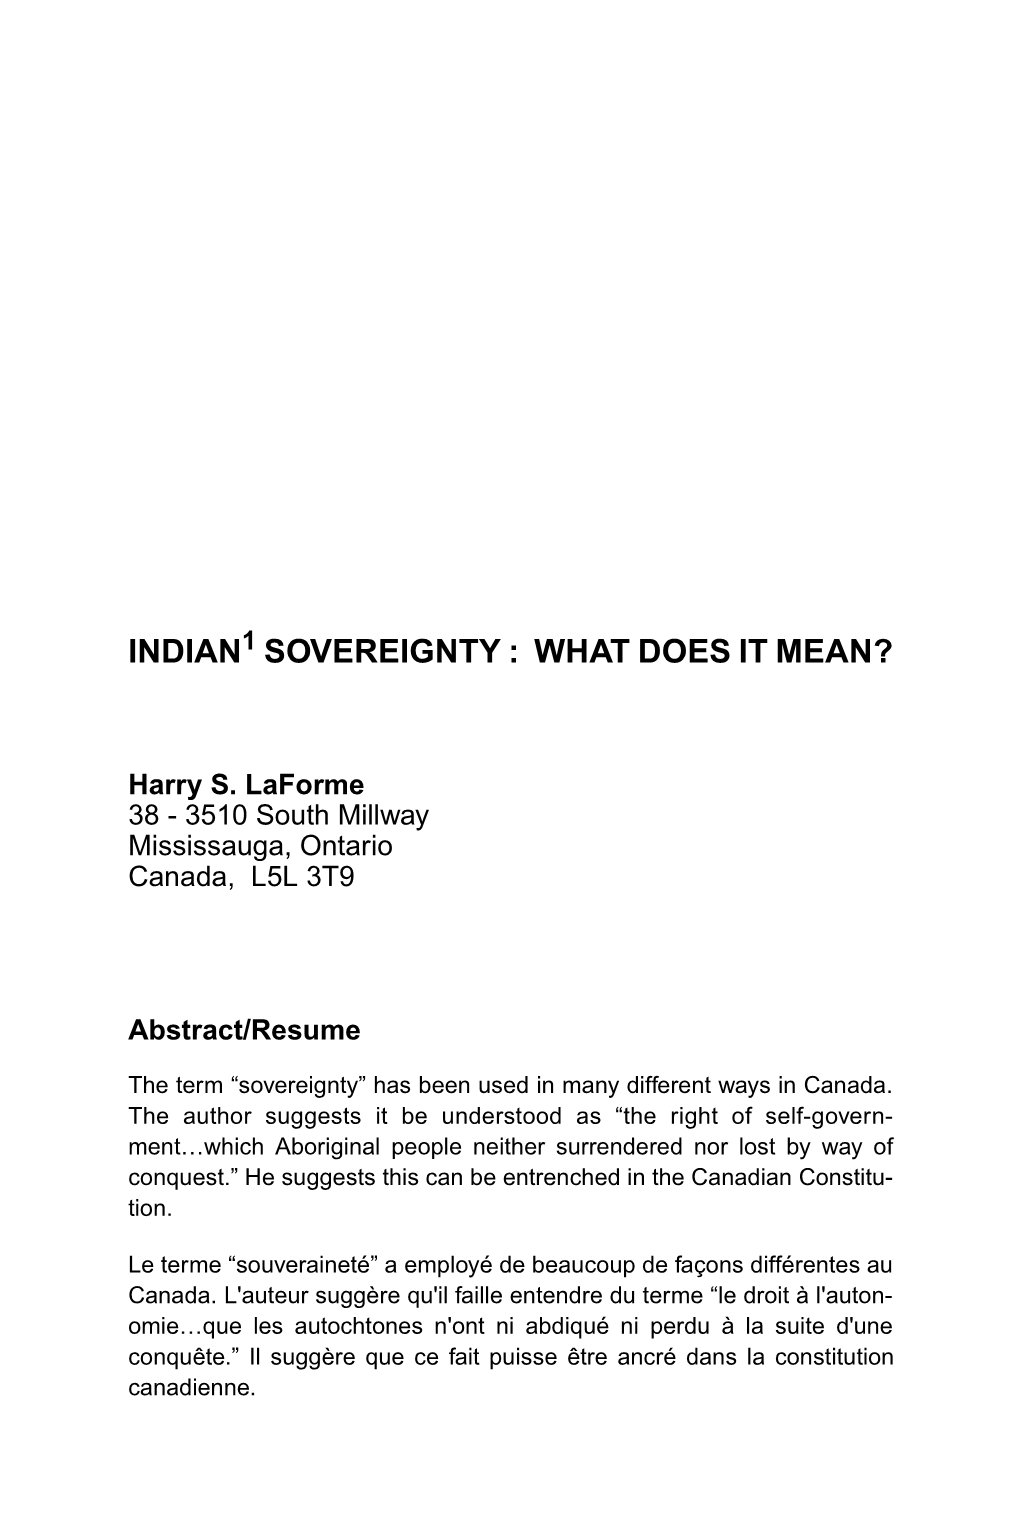 Indian Sovereignty : What Does It Mean?